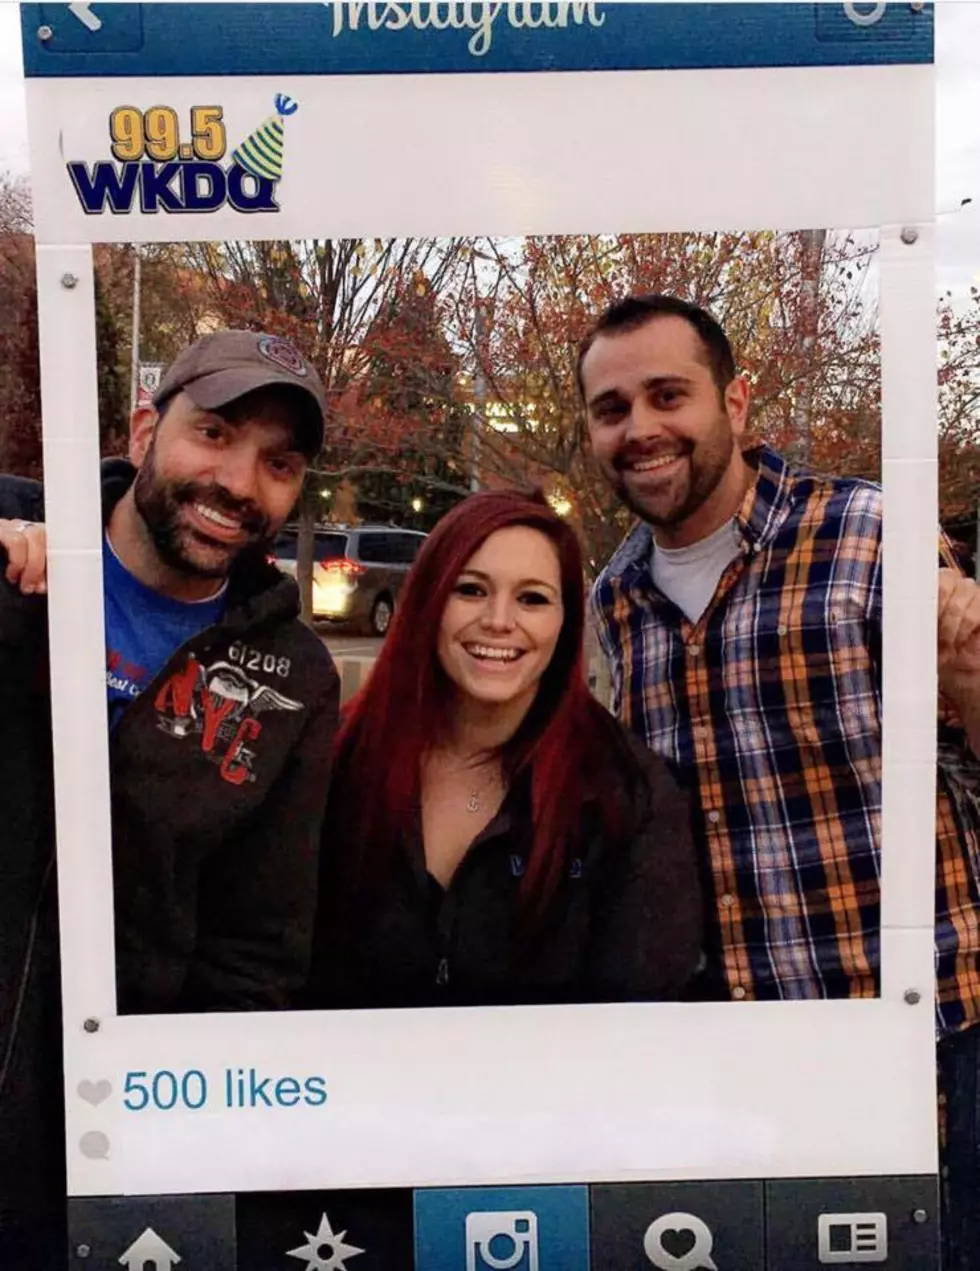 Pre-Carrie Underwood Concert Fun with WKDQ [PHOTOS]